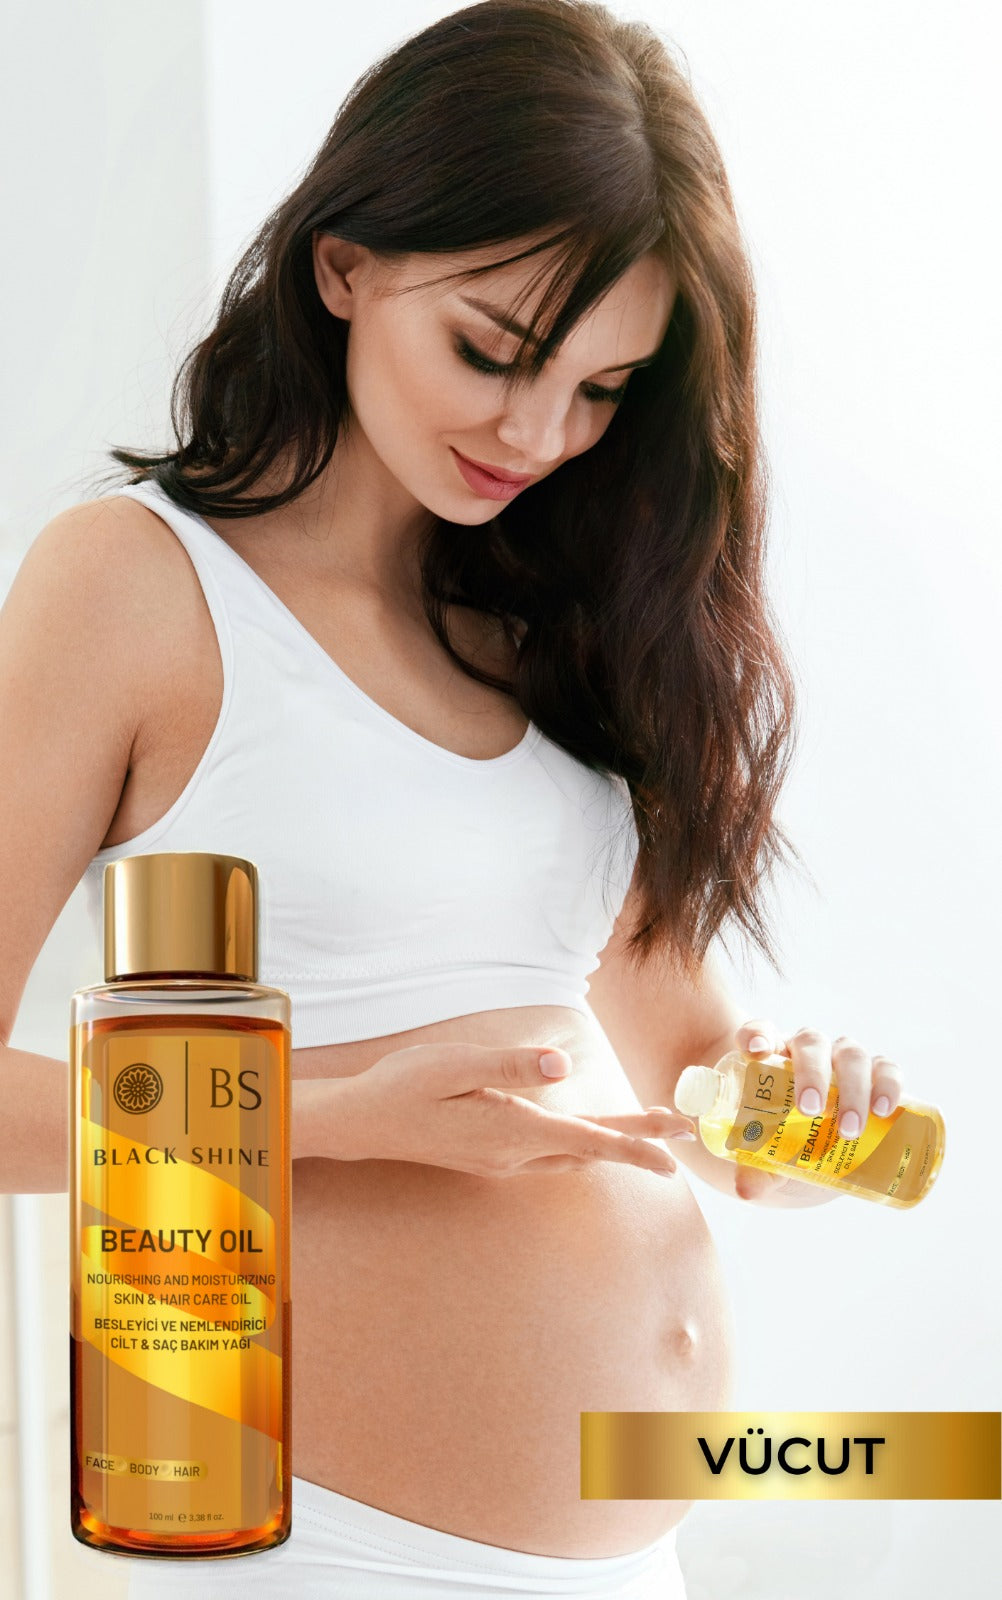 Beauty Oil Moisturizer And Radiant Anti-Blemish And Stretch Mark Multi-Purpose Miraculous Care And Repair Oil 100ml